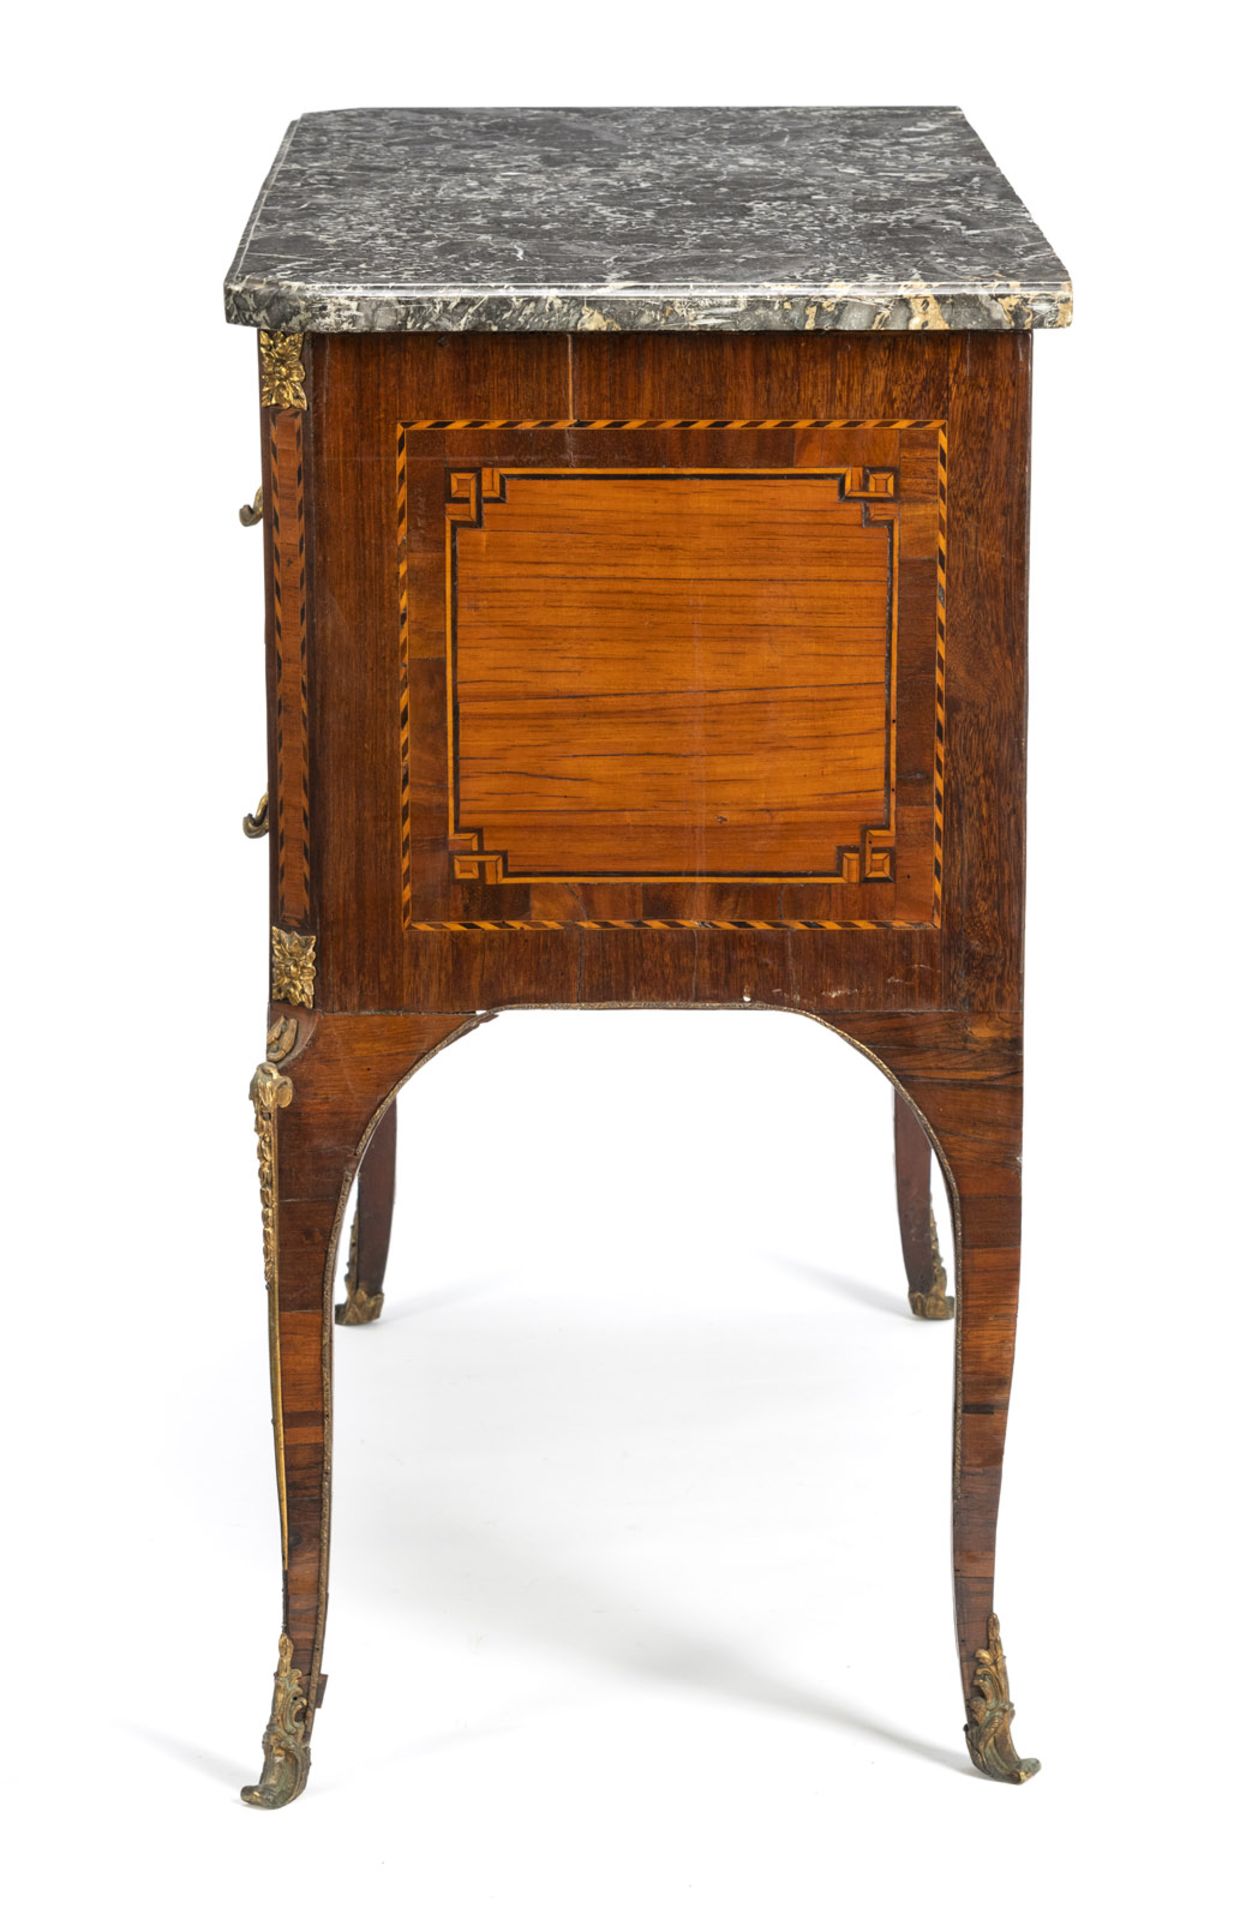 A FRENCH TRANSITIONAL STYLE ORMOLU MOUNTED KINGWOOD AMARANTH AND FRUITWOOD MARQUETRY COMMODE - Image 9 of 9